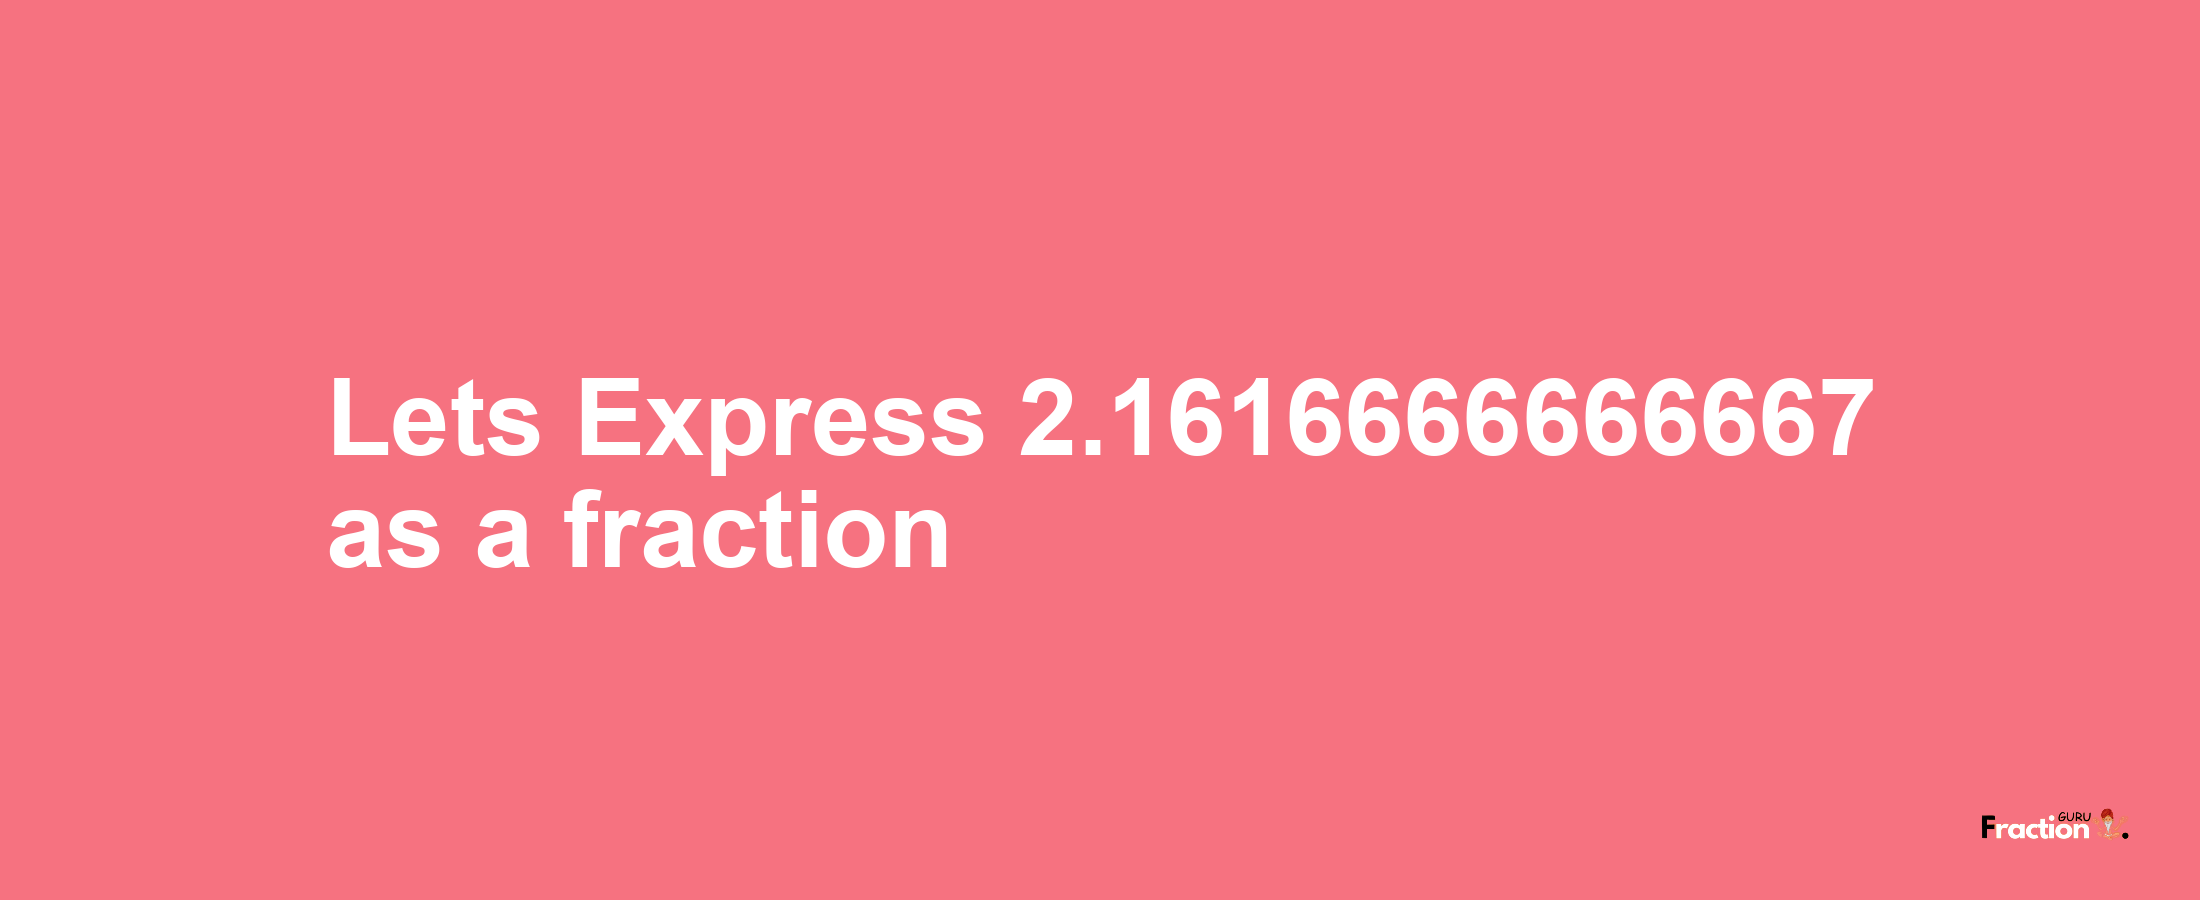 Lets Express 2.1616666666667 as afraction